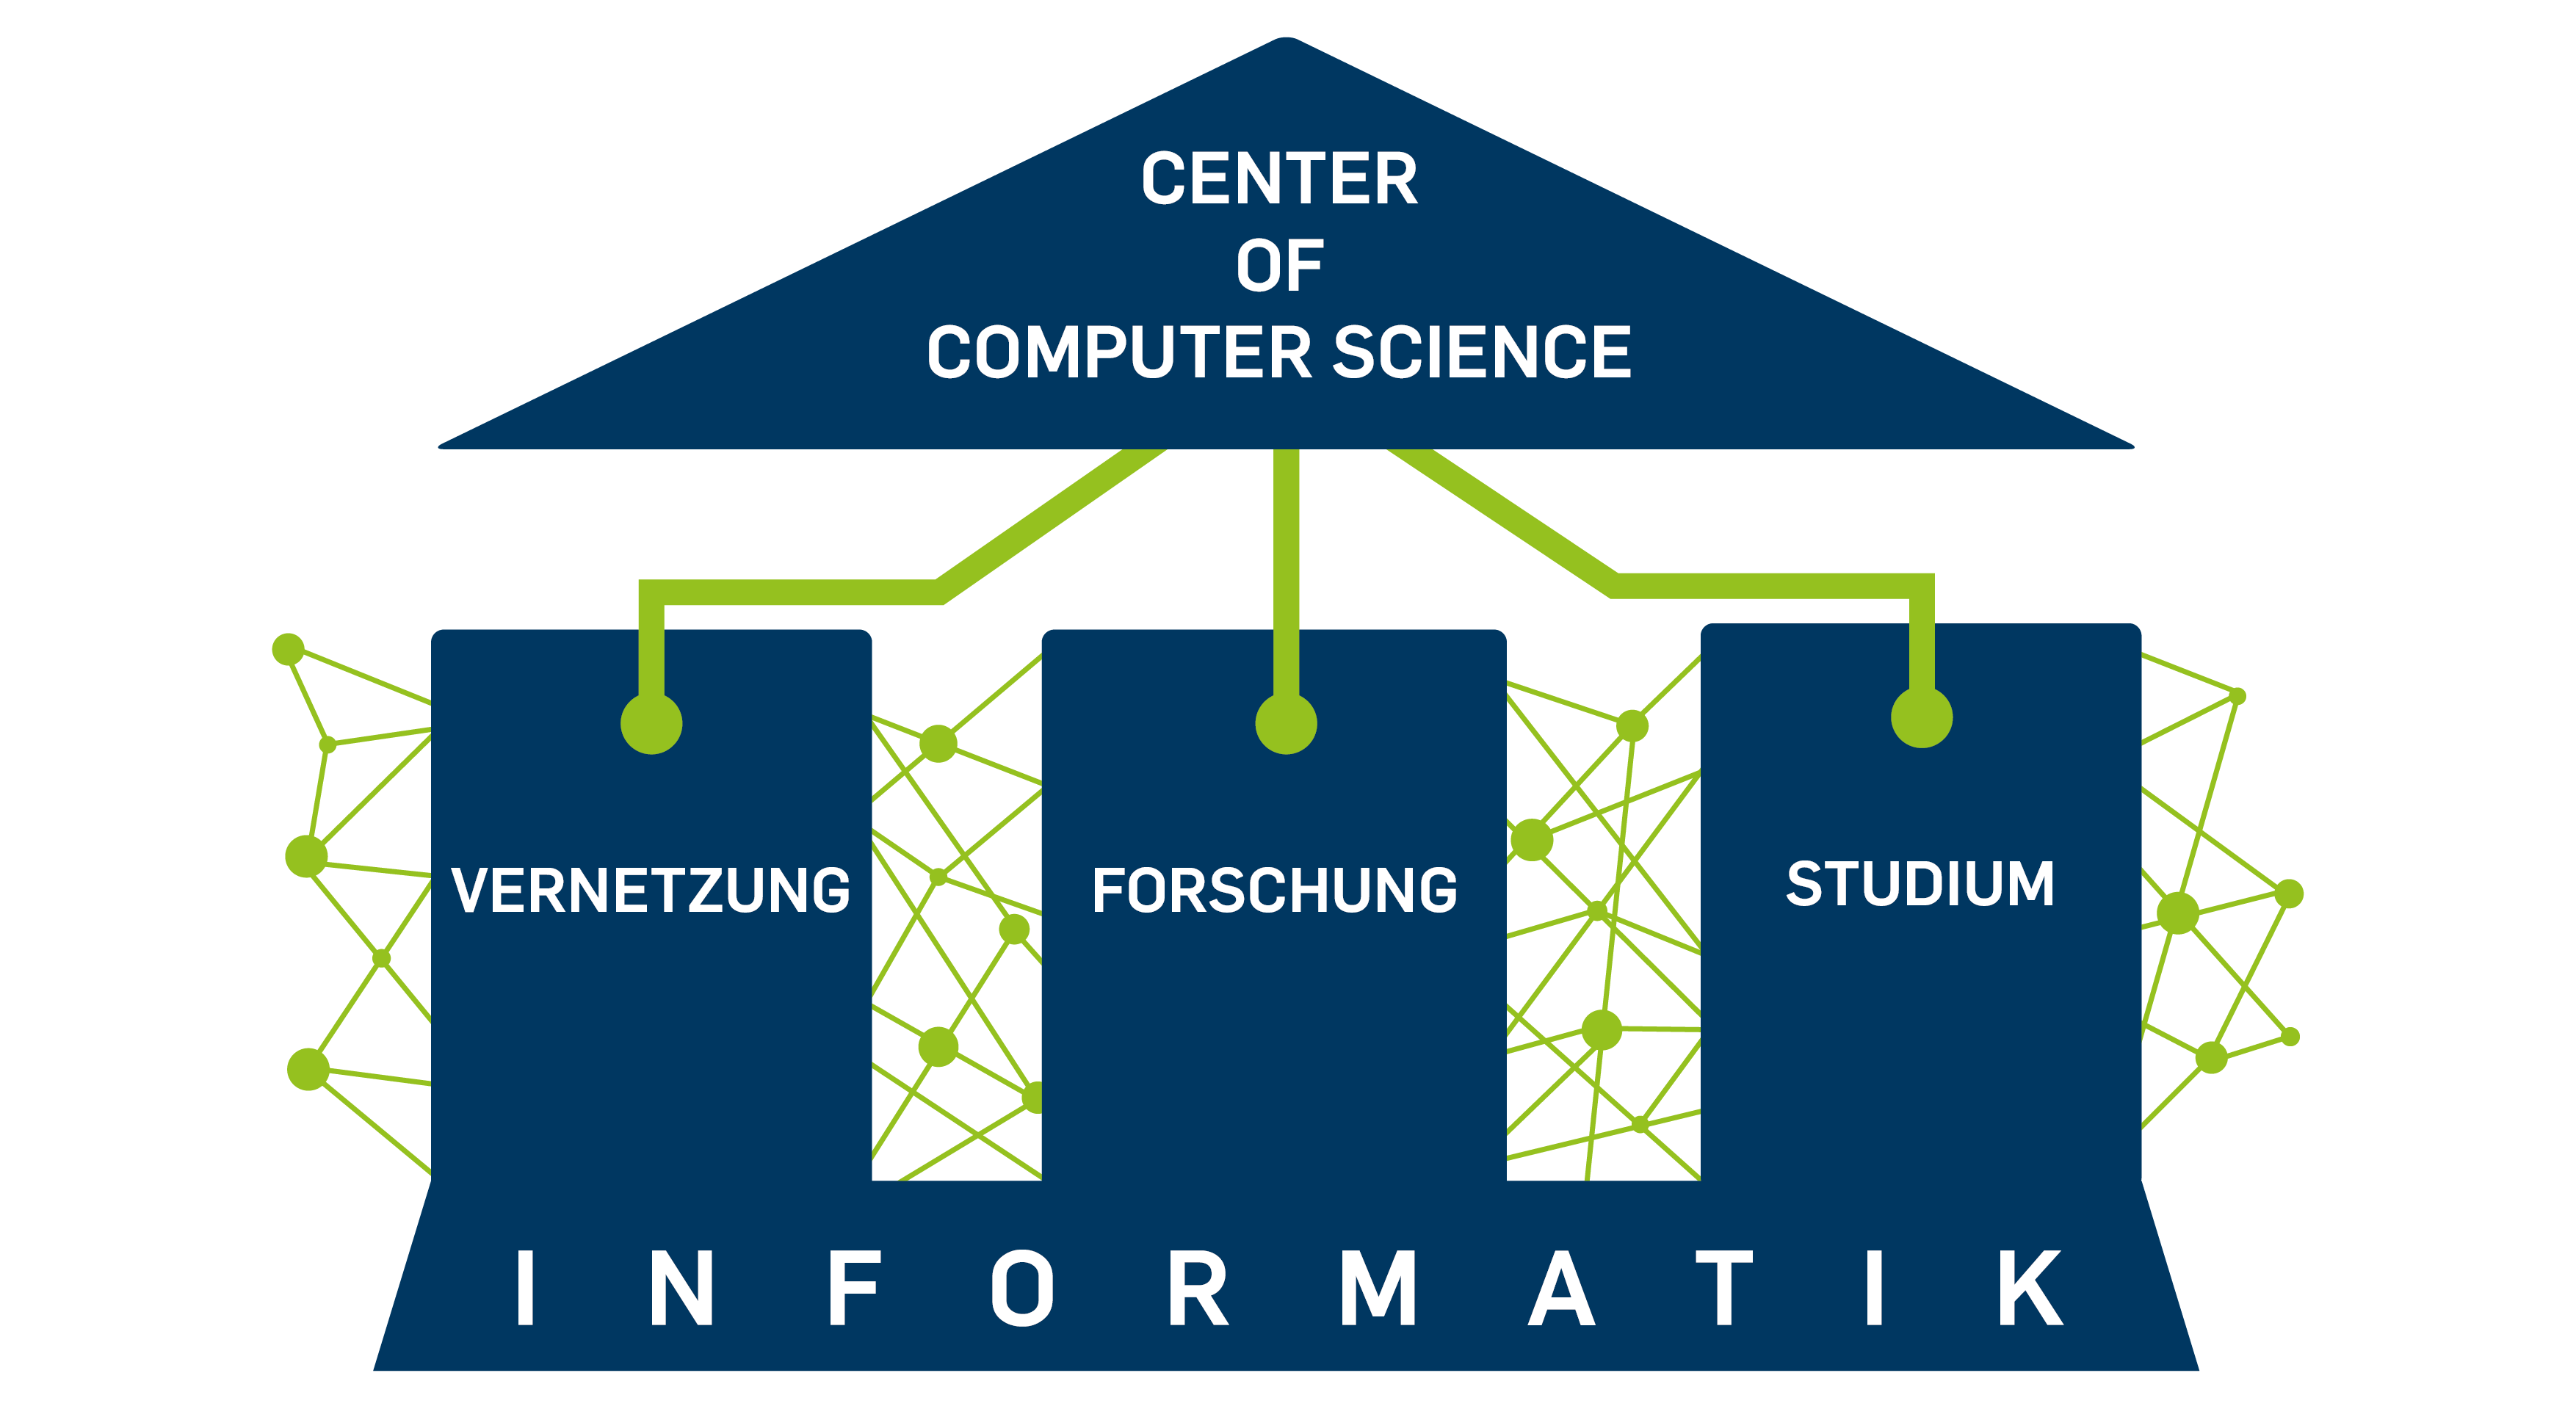 The 3 pillars of the Center Of Computer Science